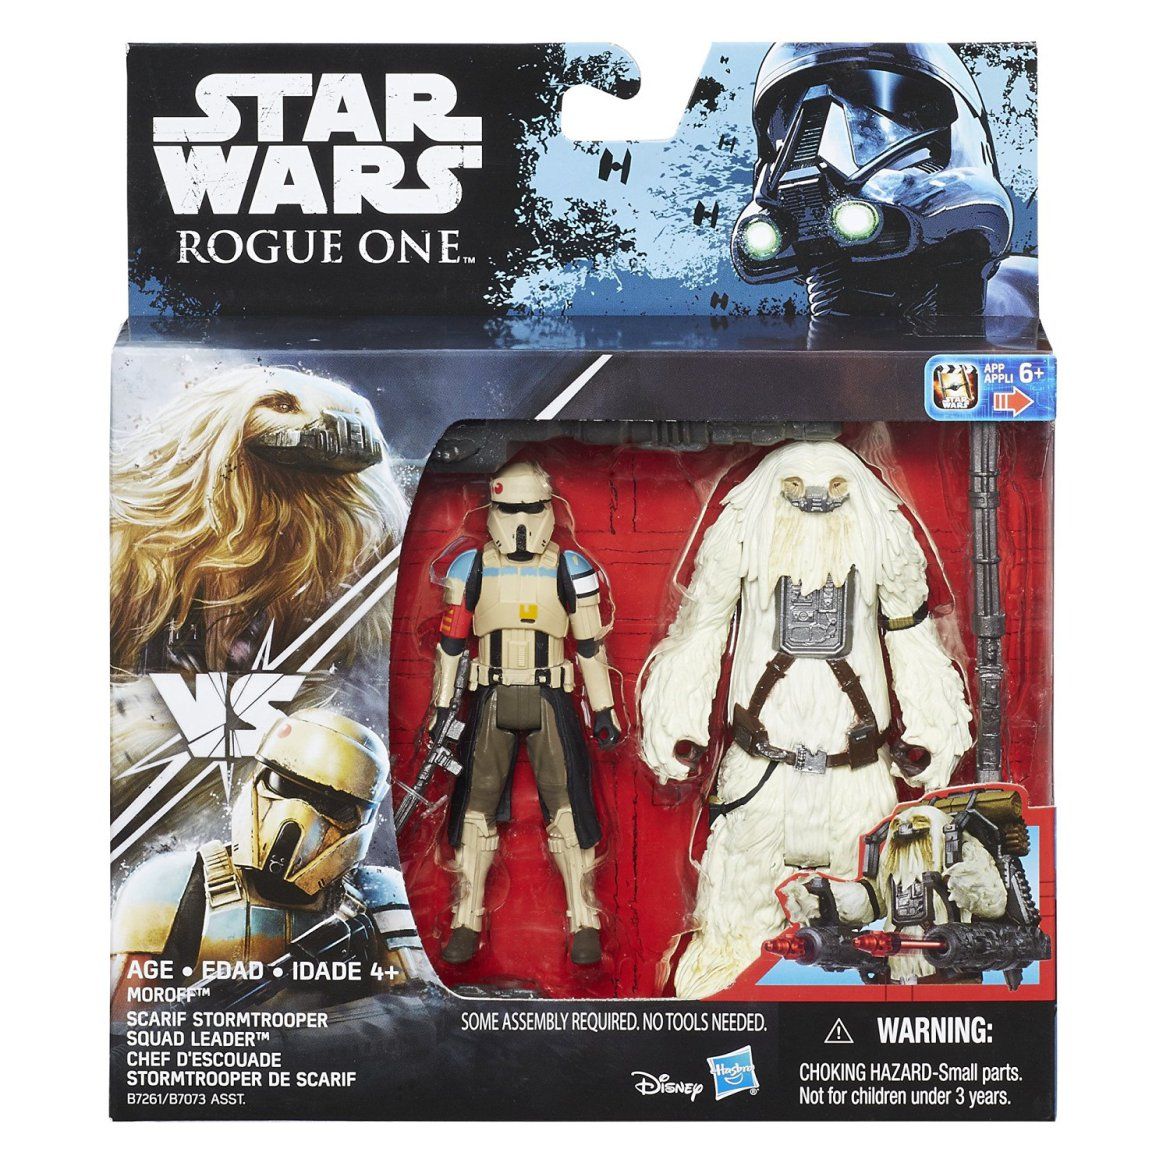 Rogue One Moroff Scarif Stormtrooper Squad Leader action figure